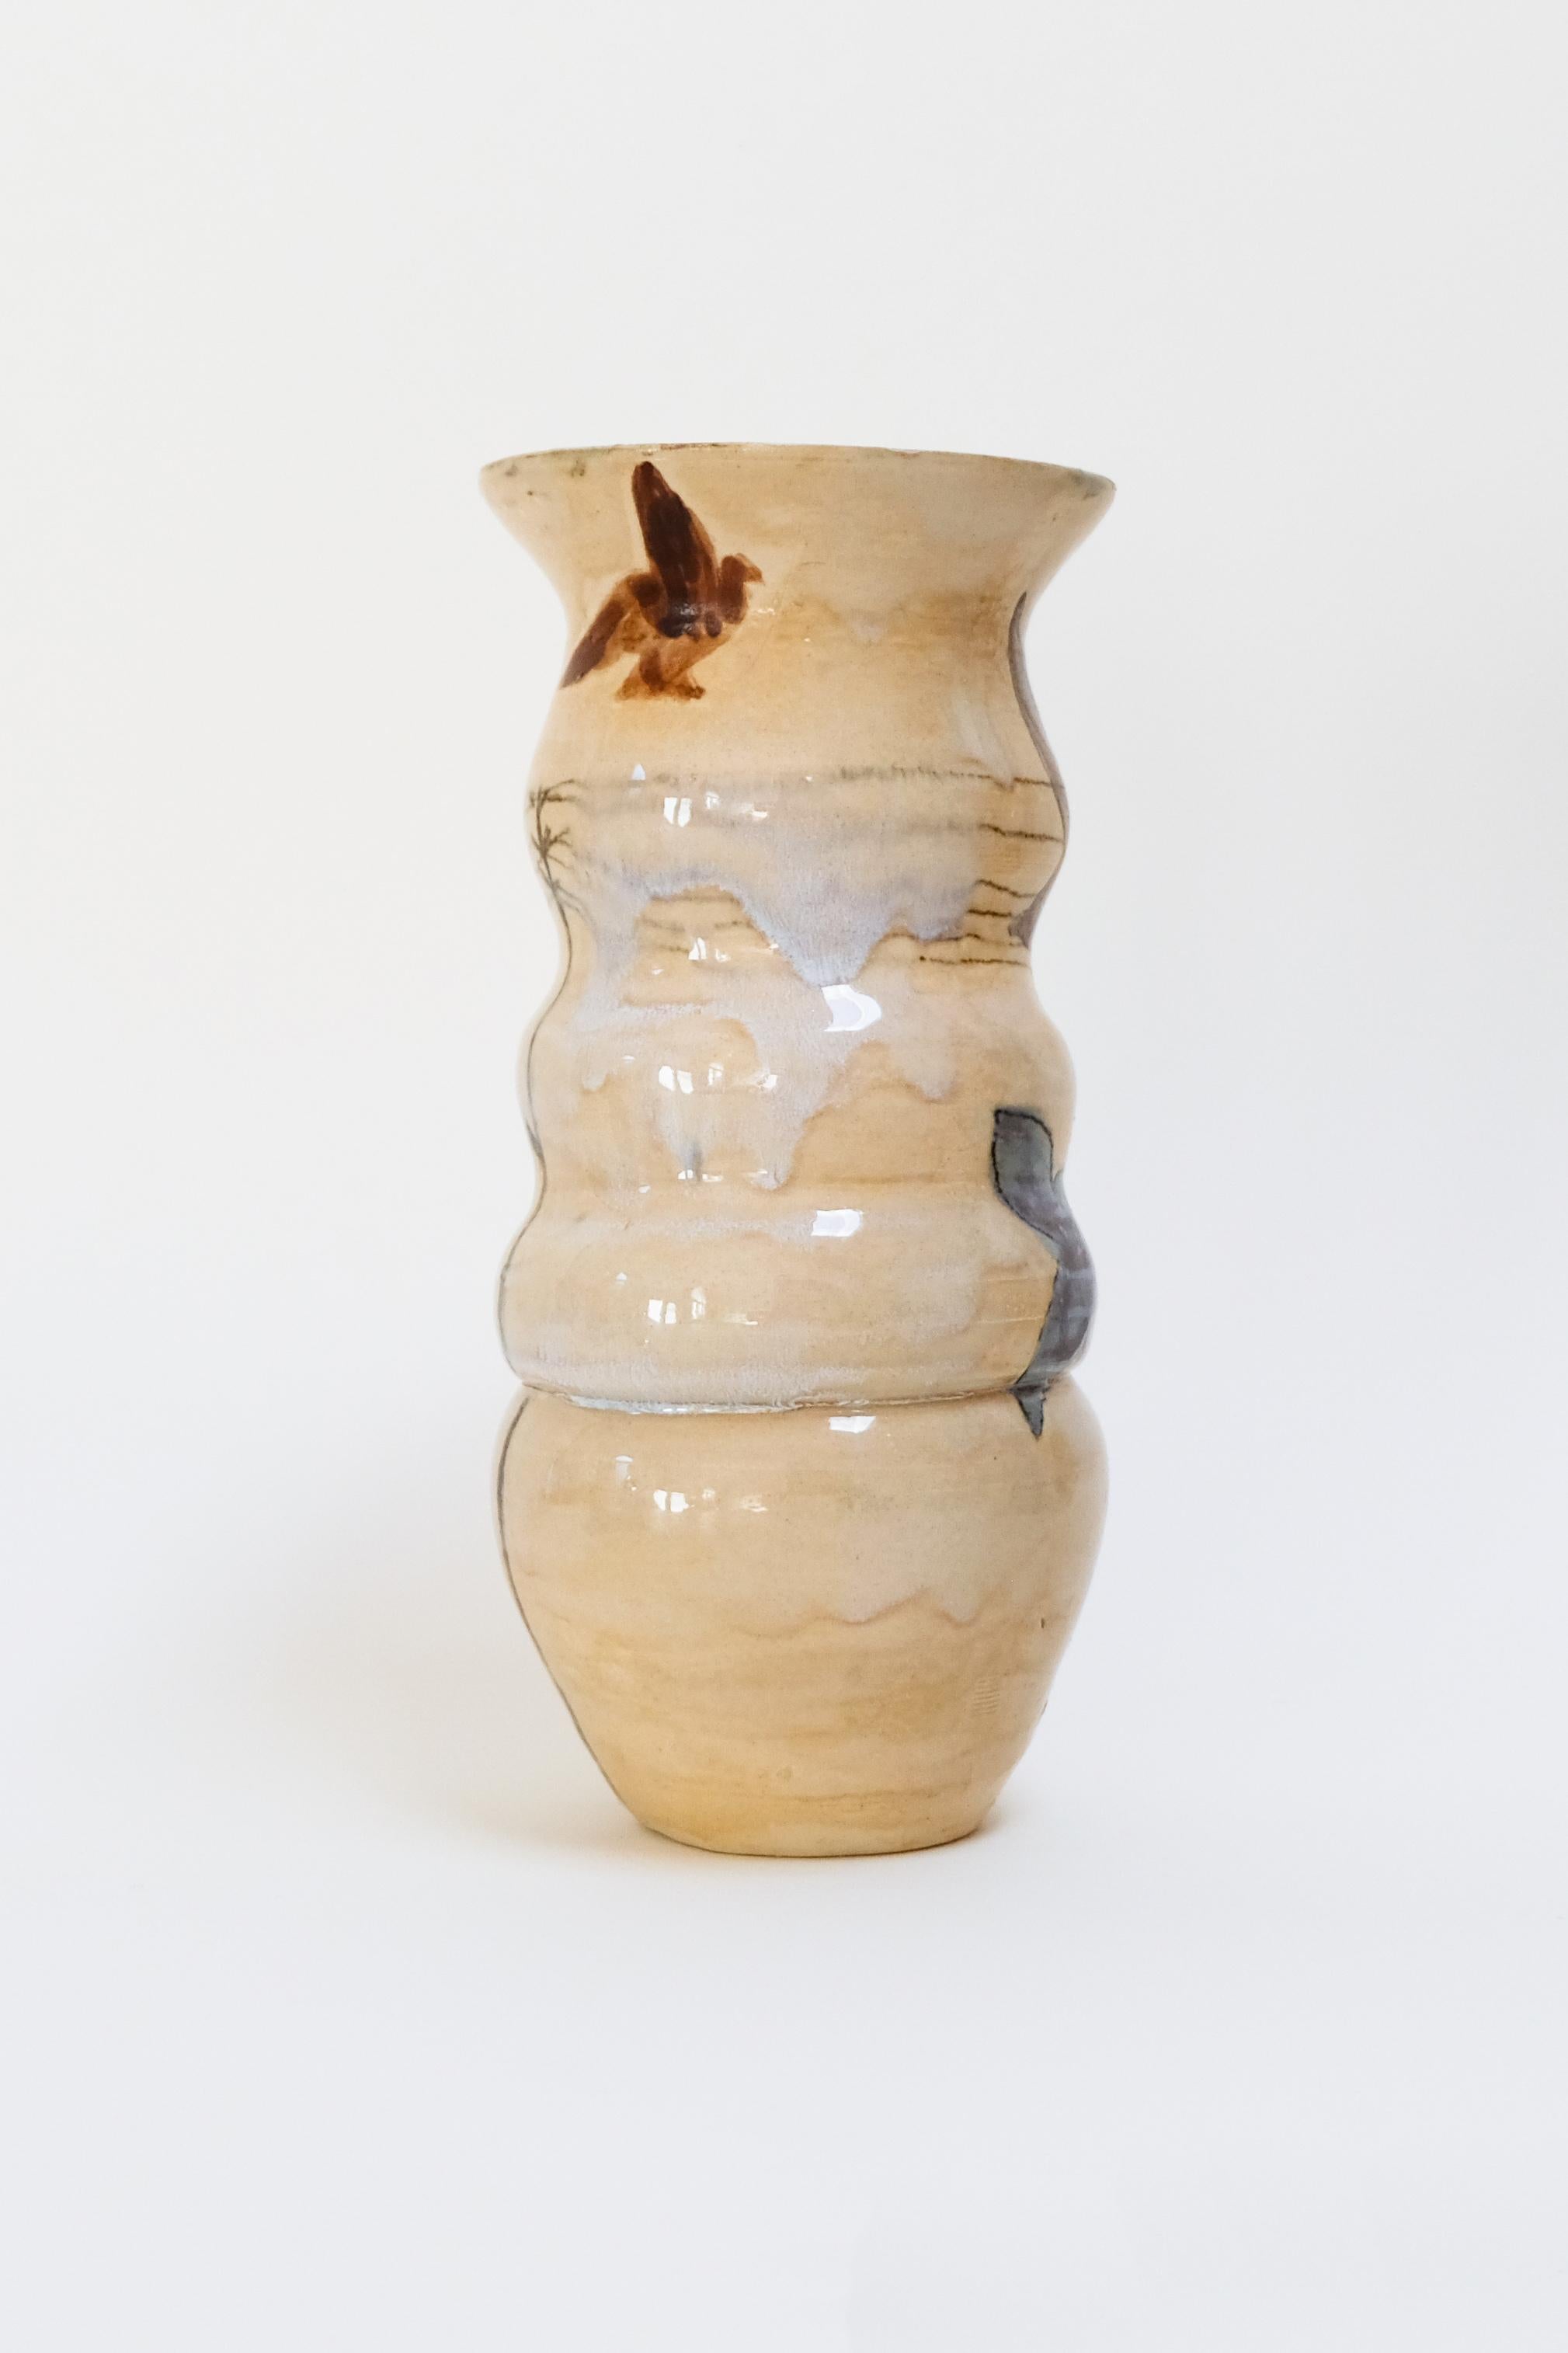 This warm yellow contemporary botanical ceramic vase features a unique bird design and is an original artwork by Canadian artist Misbah Ahmed. This piece from her collection of Mur vessels explores organic feminine forms with clay. Mur - meaning